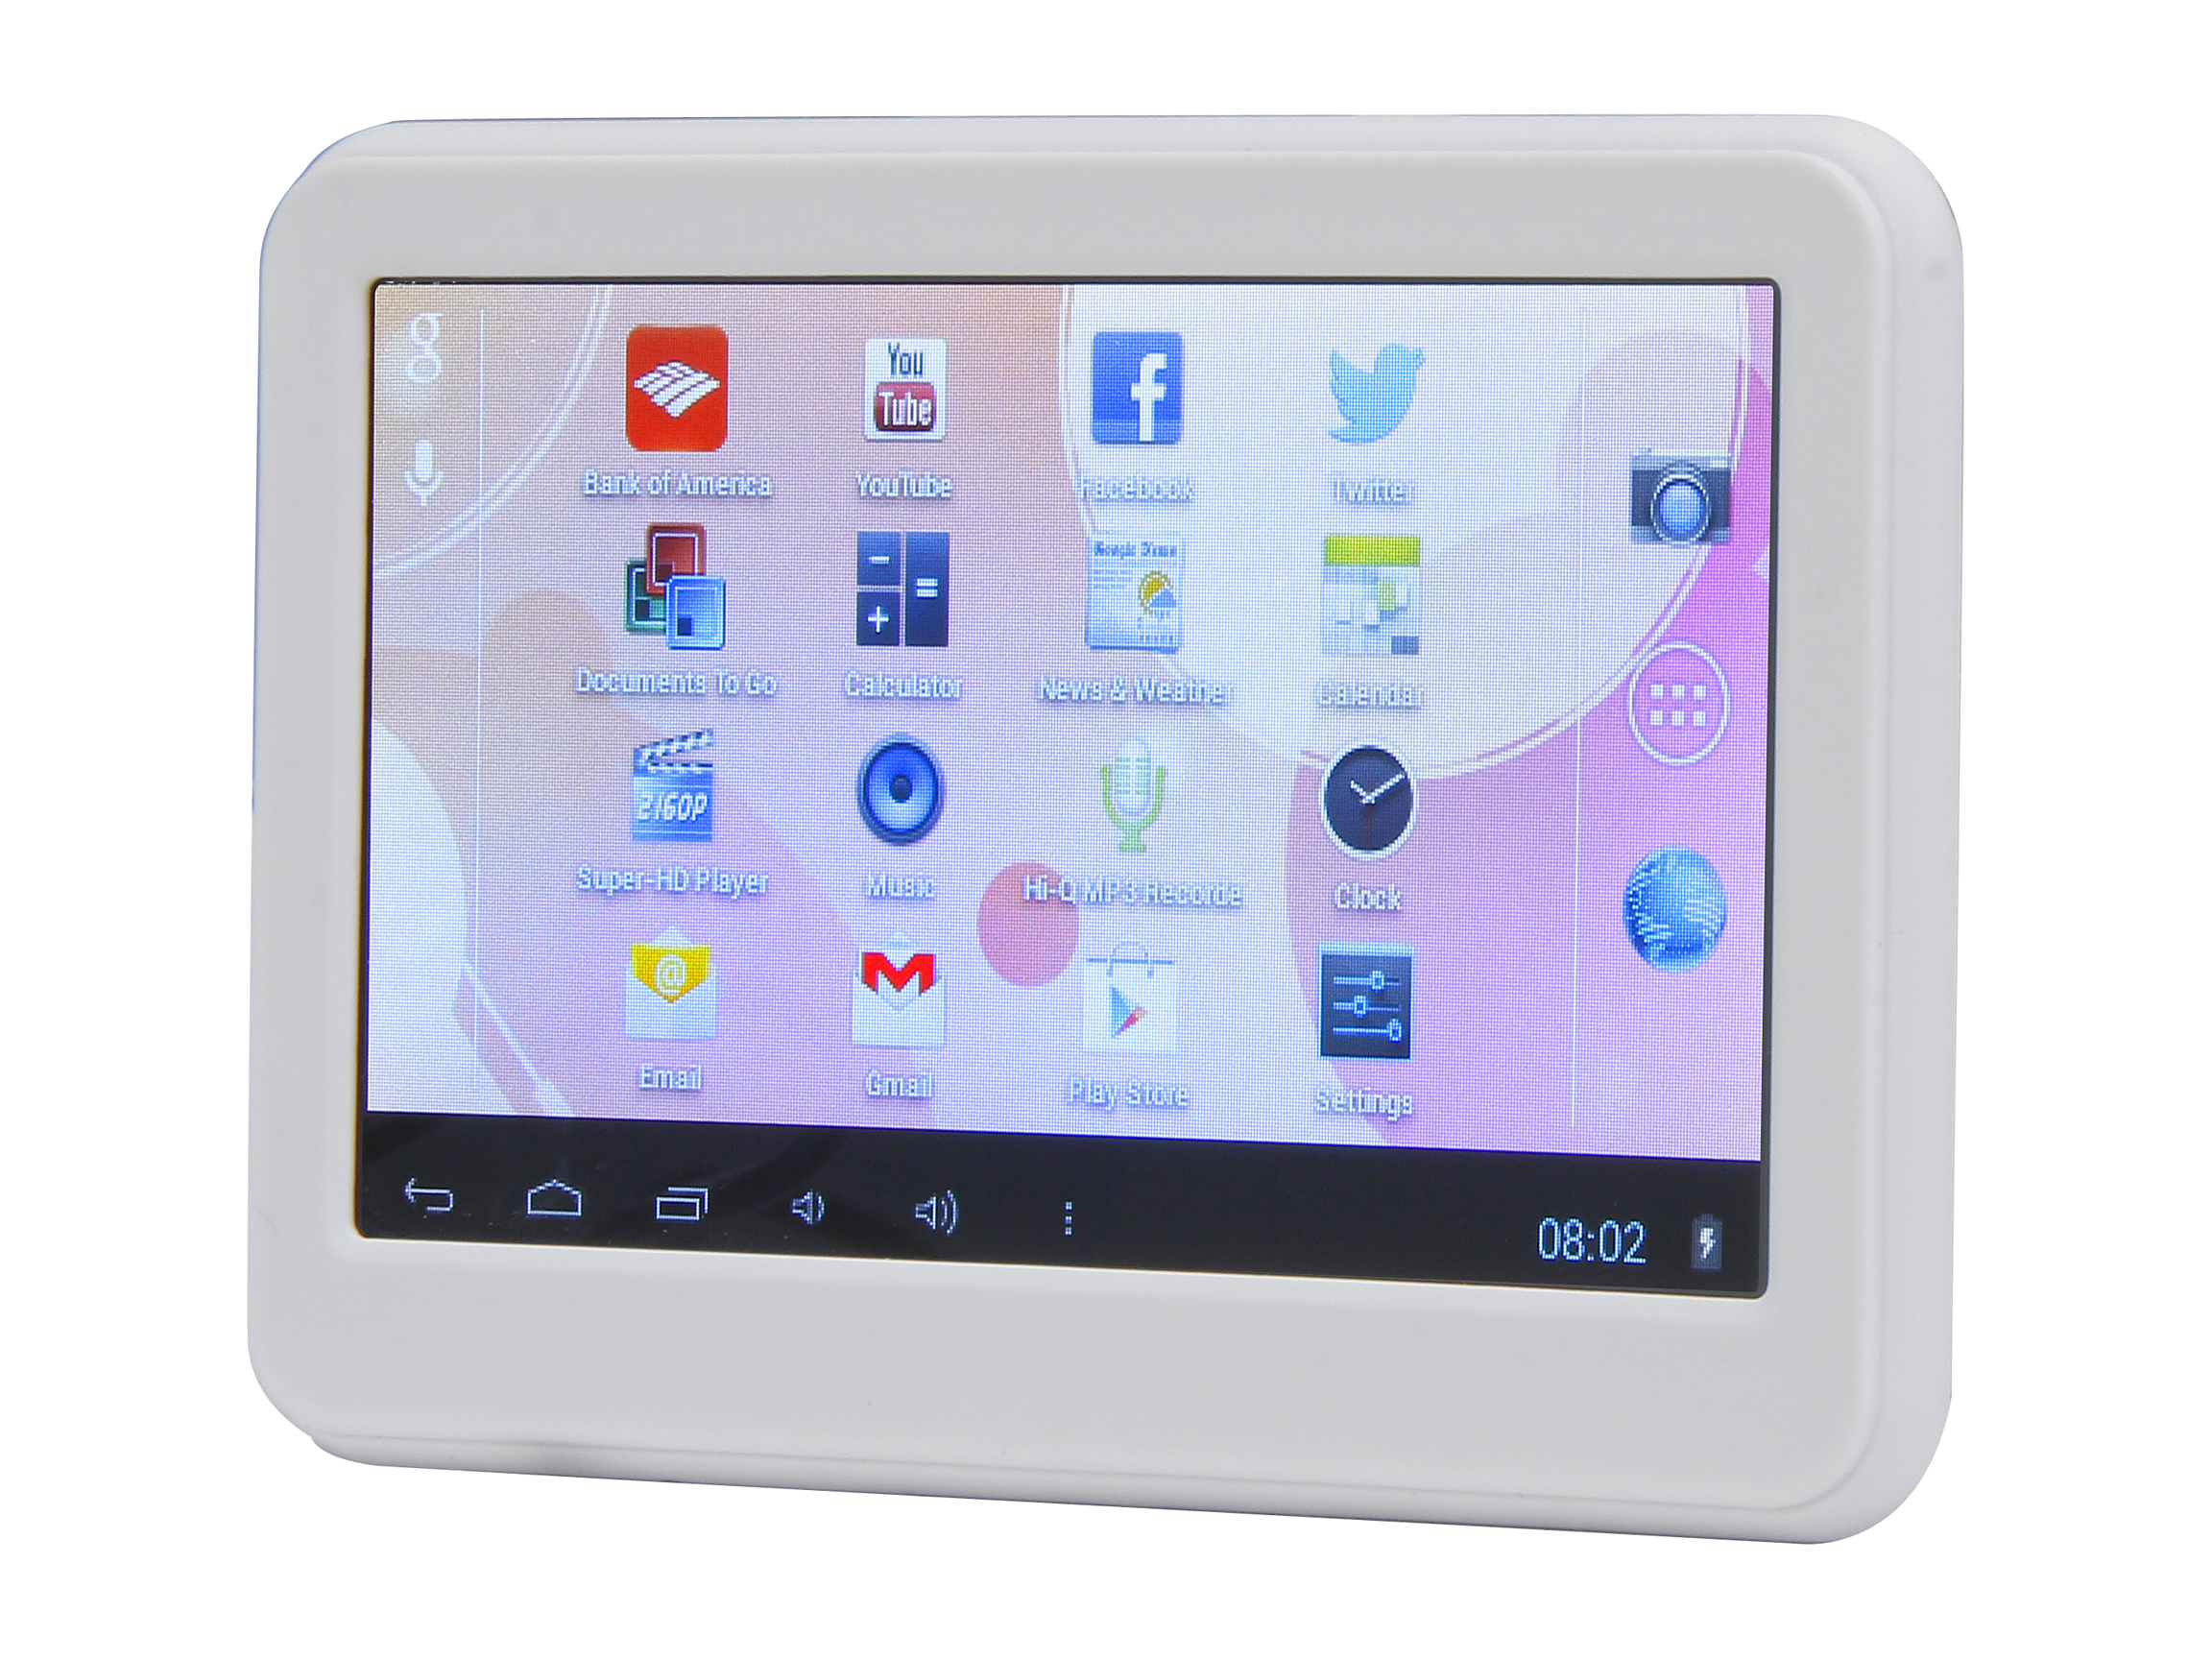 iView CyberPad 420TPC Android Tablet   1.2GHz 512MB DDR3 4GB flash memory 4.3" Tablet WIFI Android 4.2 White (iVIEW 420TPC WT)